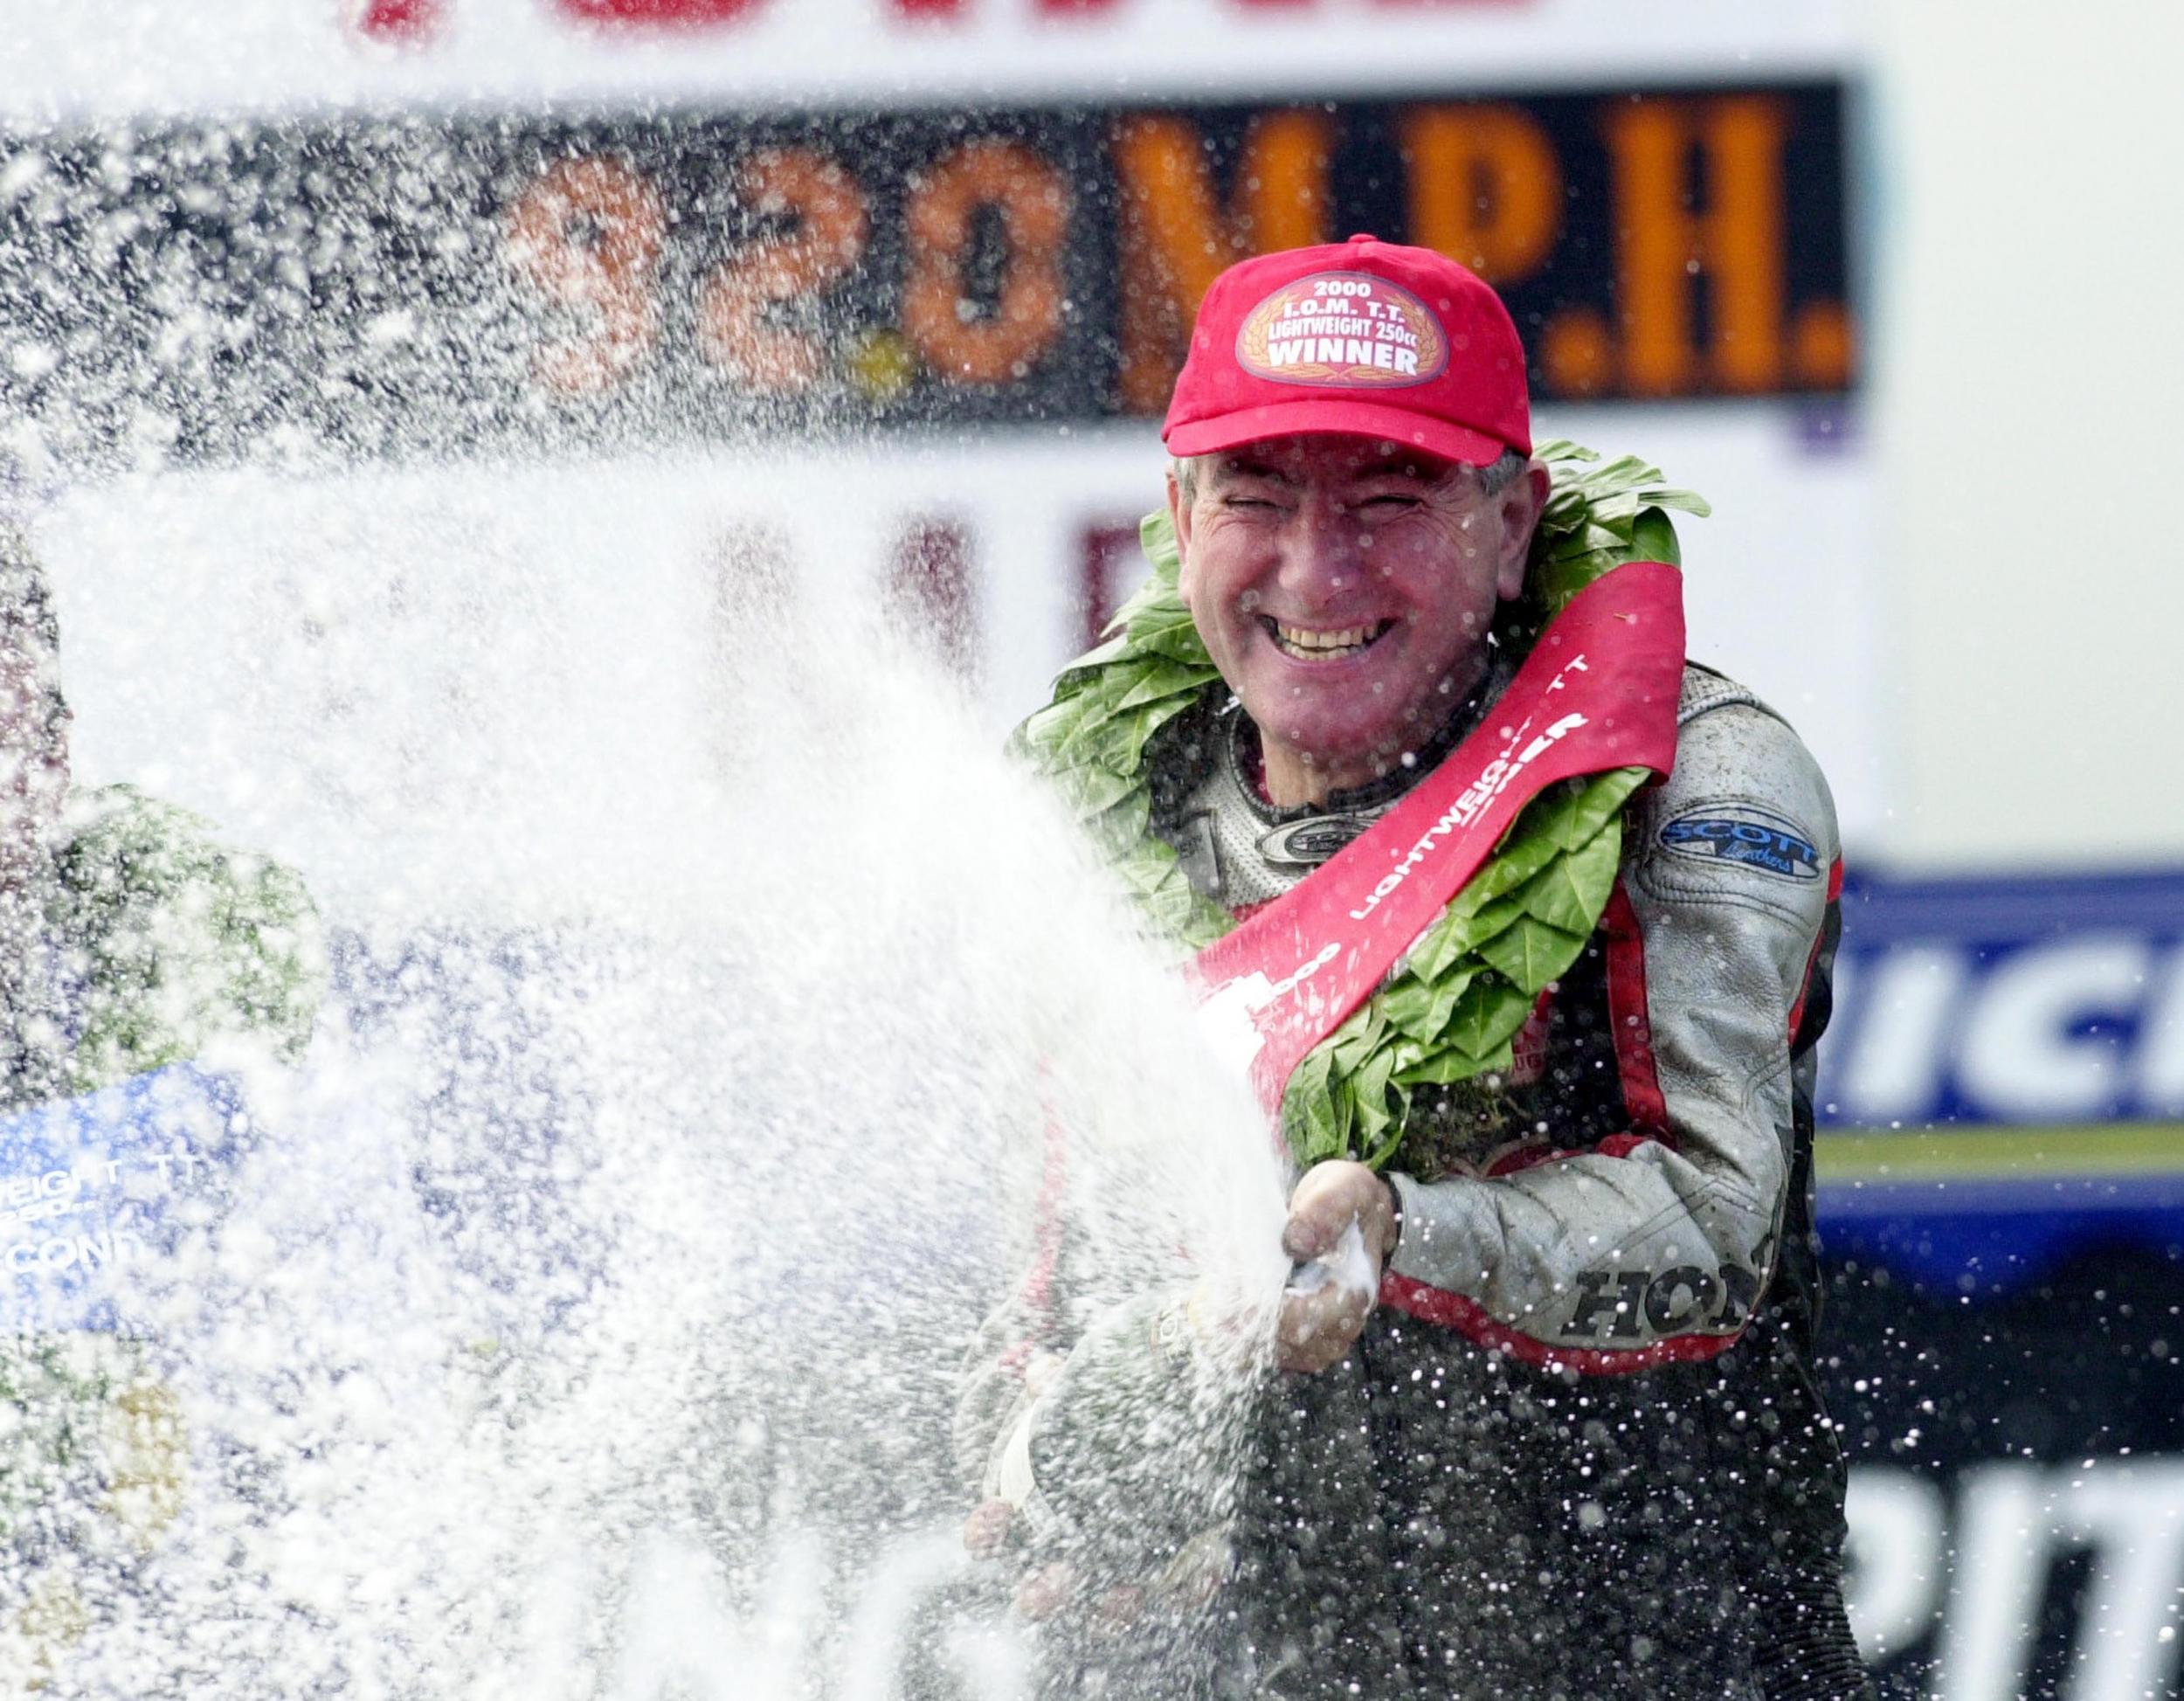 Many remember Dunlop’s smiles on the podium from 2000